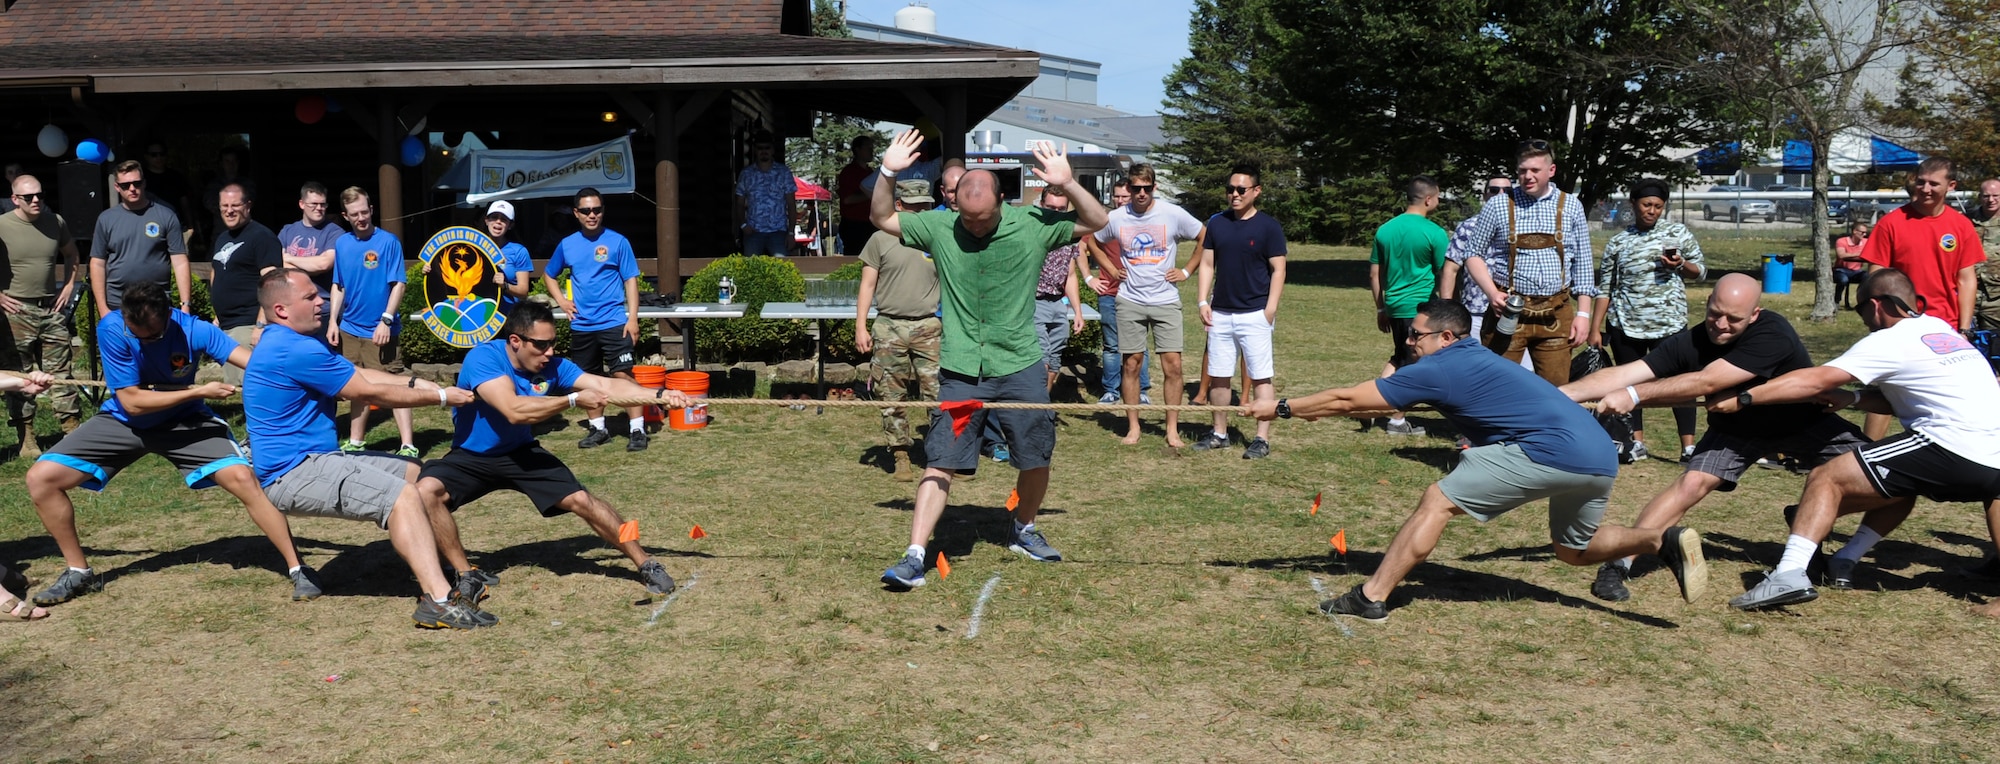 National Air and Space Intelligence Center members compete in a Tug-of-War event during NASIC’s annual Oktoberfest at Bass Lake, Wright-Patterson Air Force Base, Ohio on Sept. 27, 2019. The Air and Cyberspace Intelligence Group was declared the victors for the Oktoberfest games and claimed the prestigious Oktoberfest Cup. (U.S. Air Force photo by Senior Airman Samuel Earick/Released)